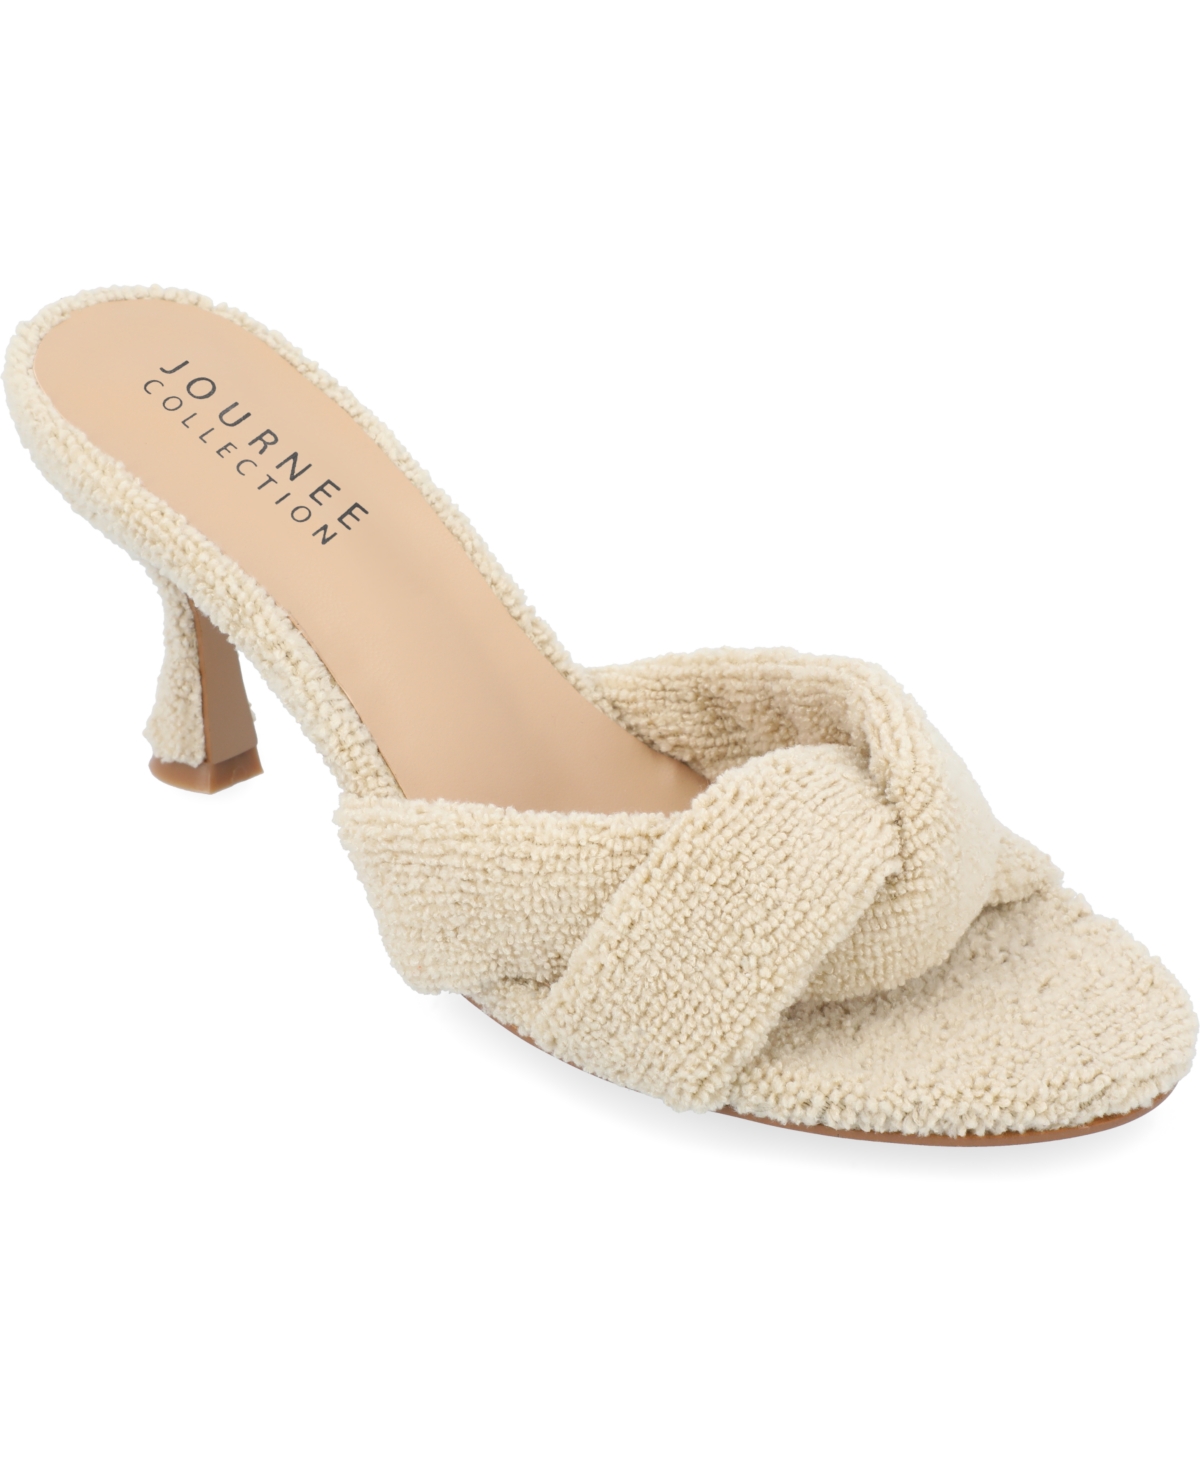 Shop Journee Collection Women's Mannon Terry Cloth Sandals In Tan